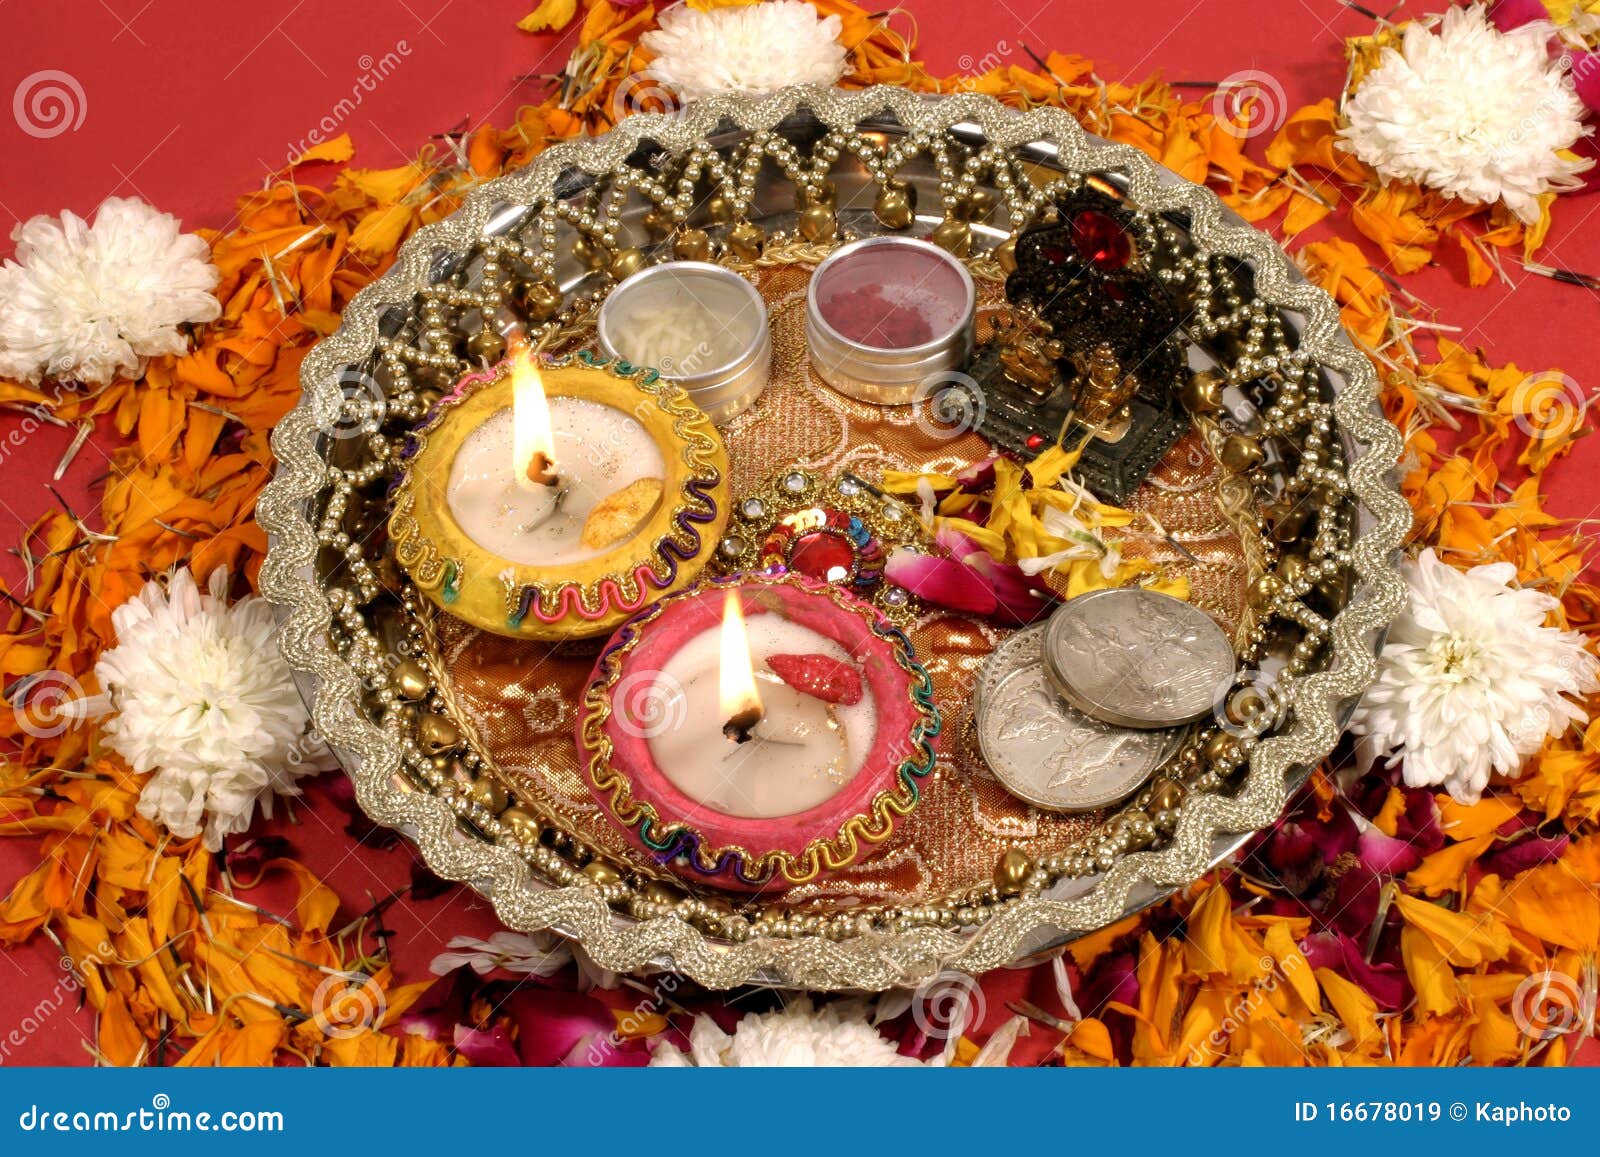 Diwali Puja, Traditional Indian Festival Royalty Free Stock Images ...